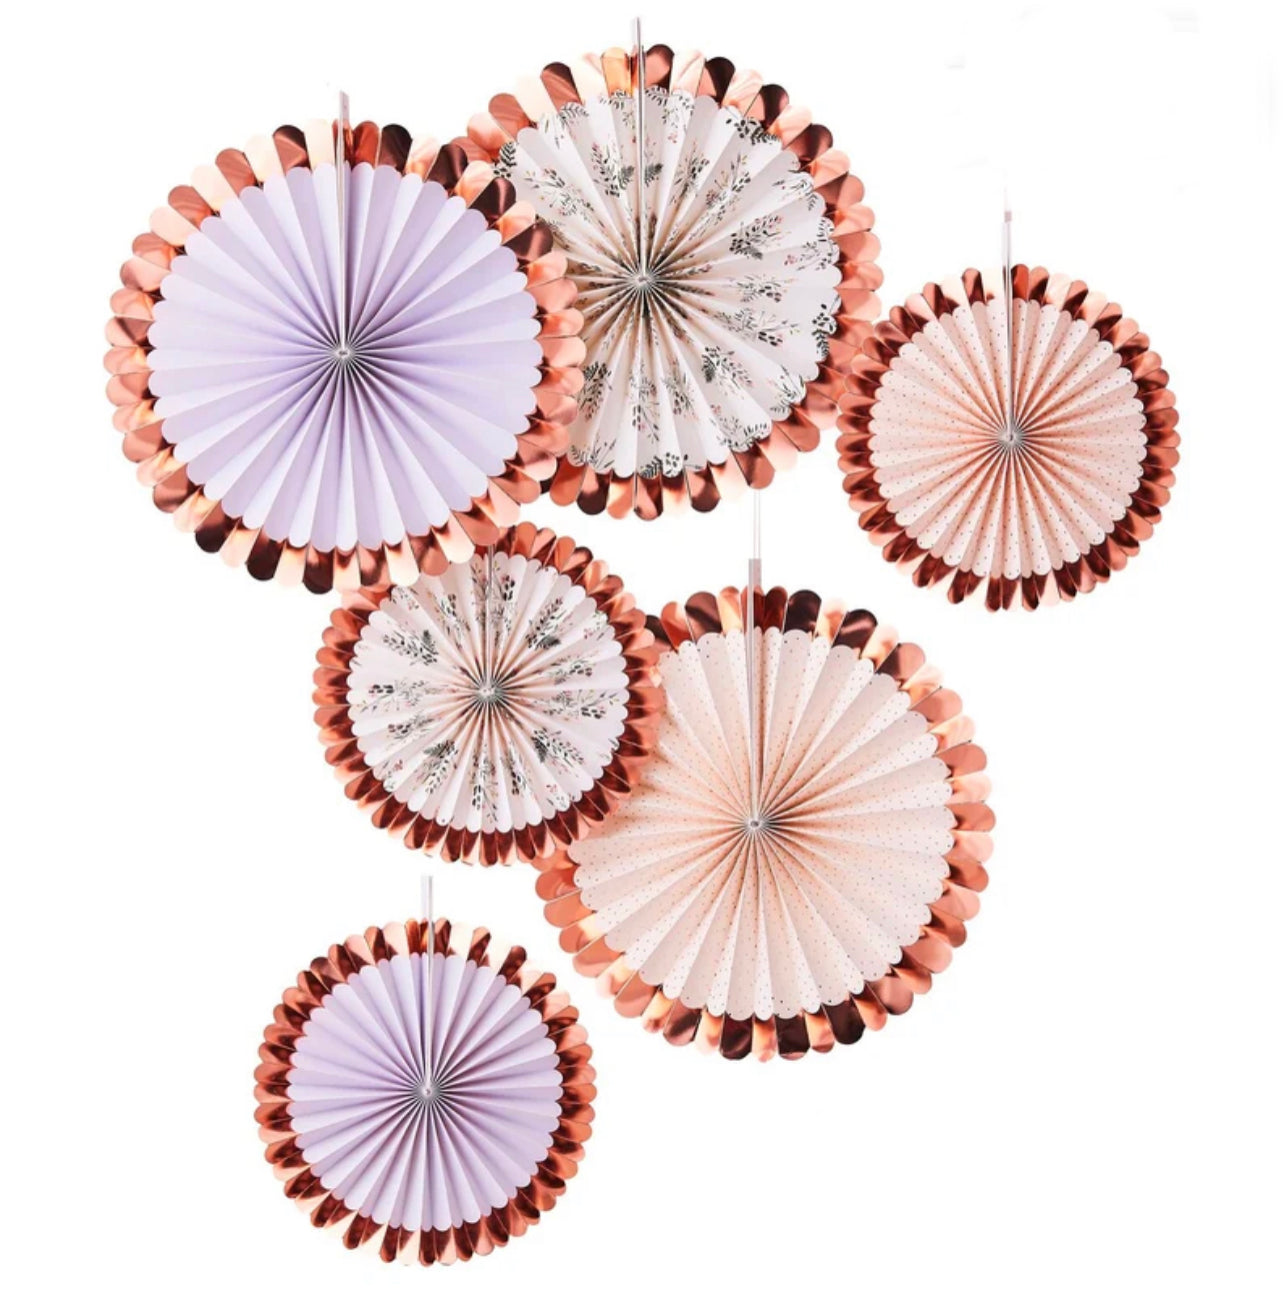 ROSE GOLD FOILED FAN DECORATIONS